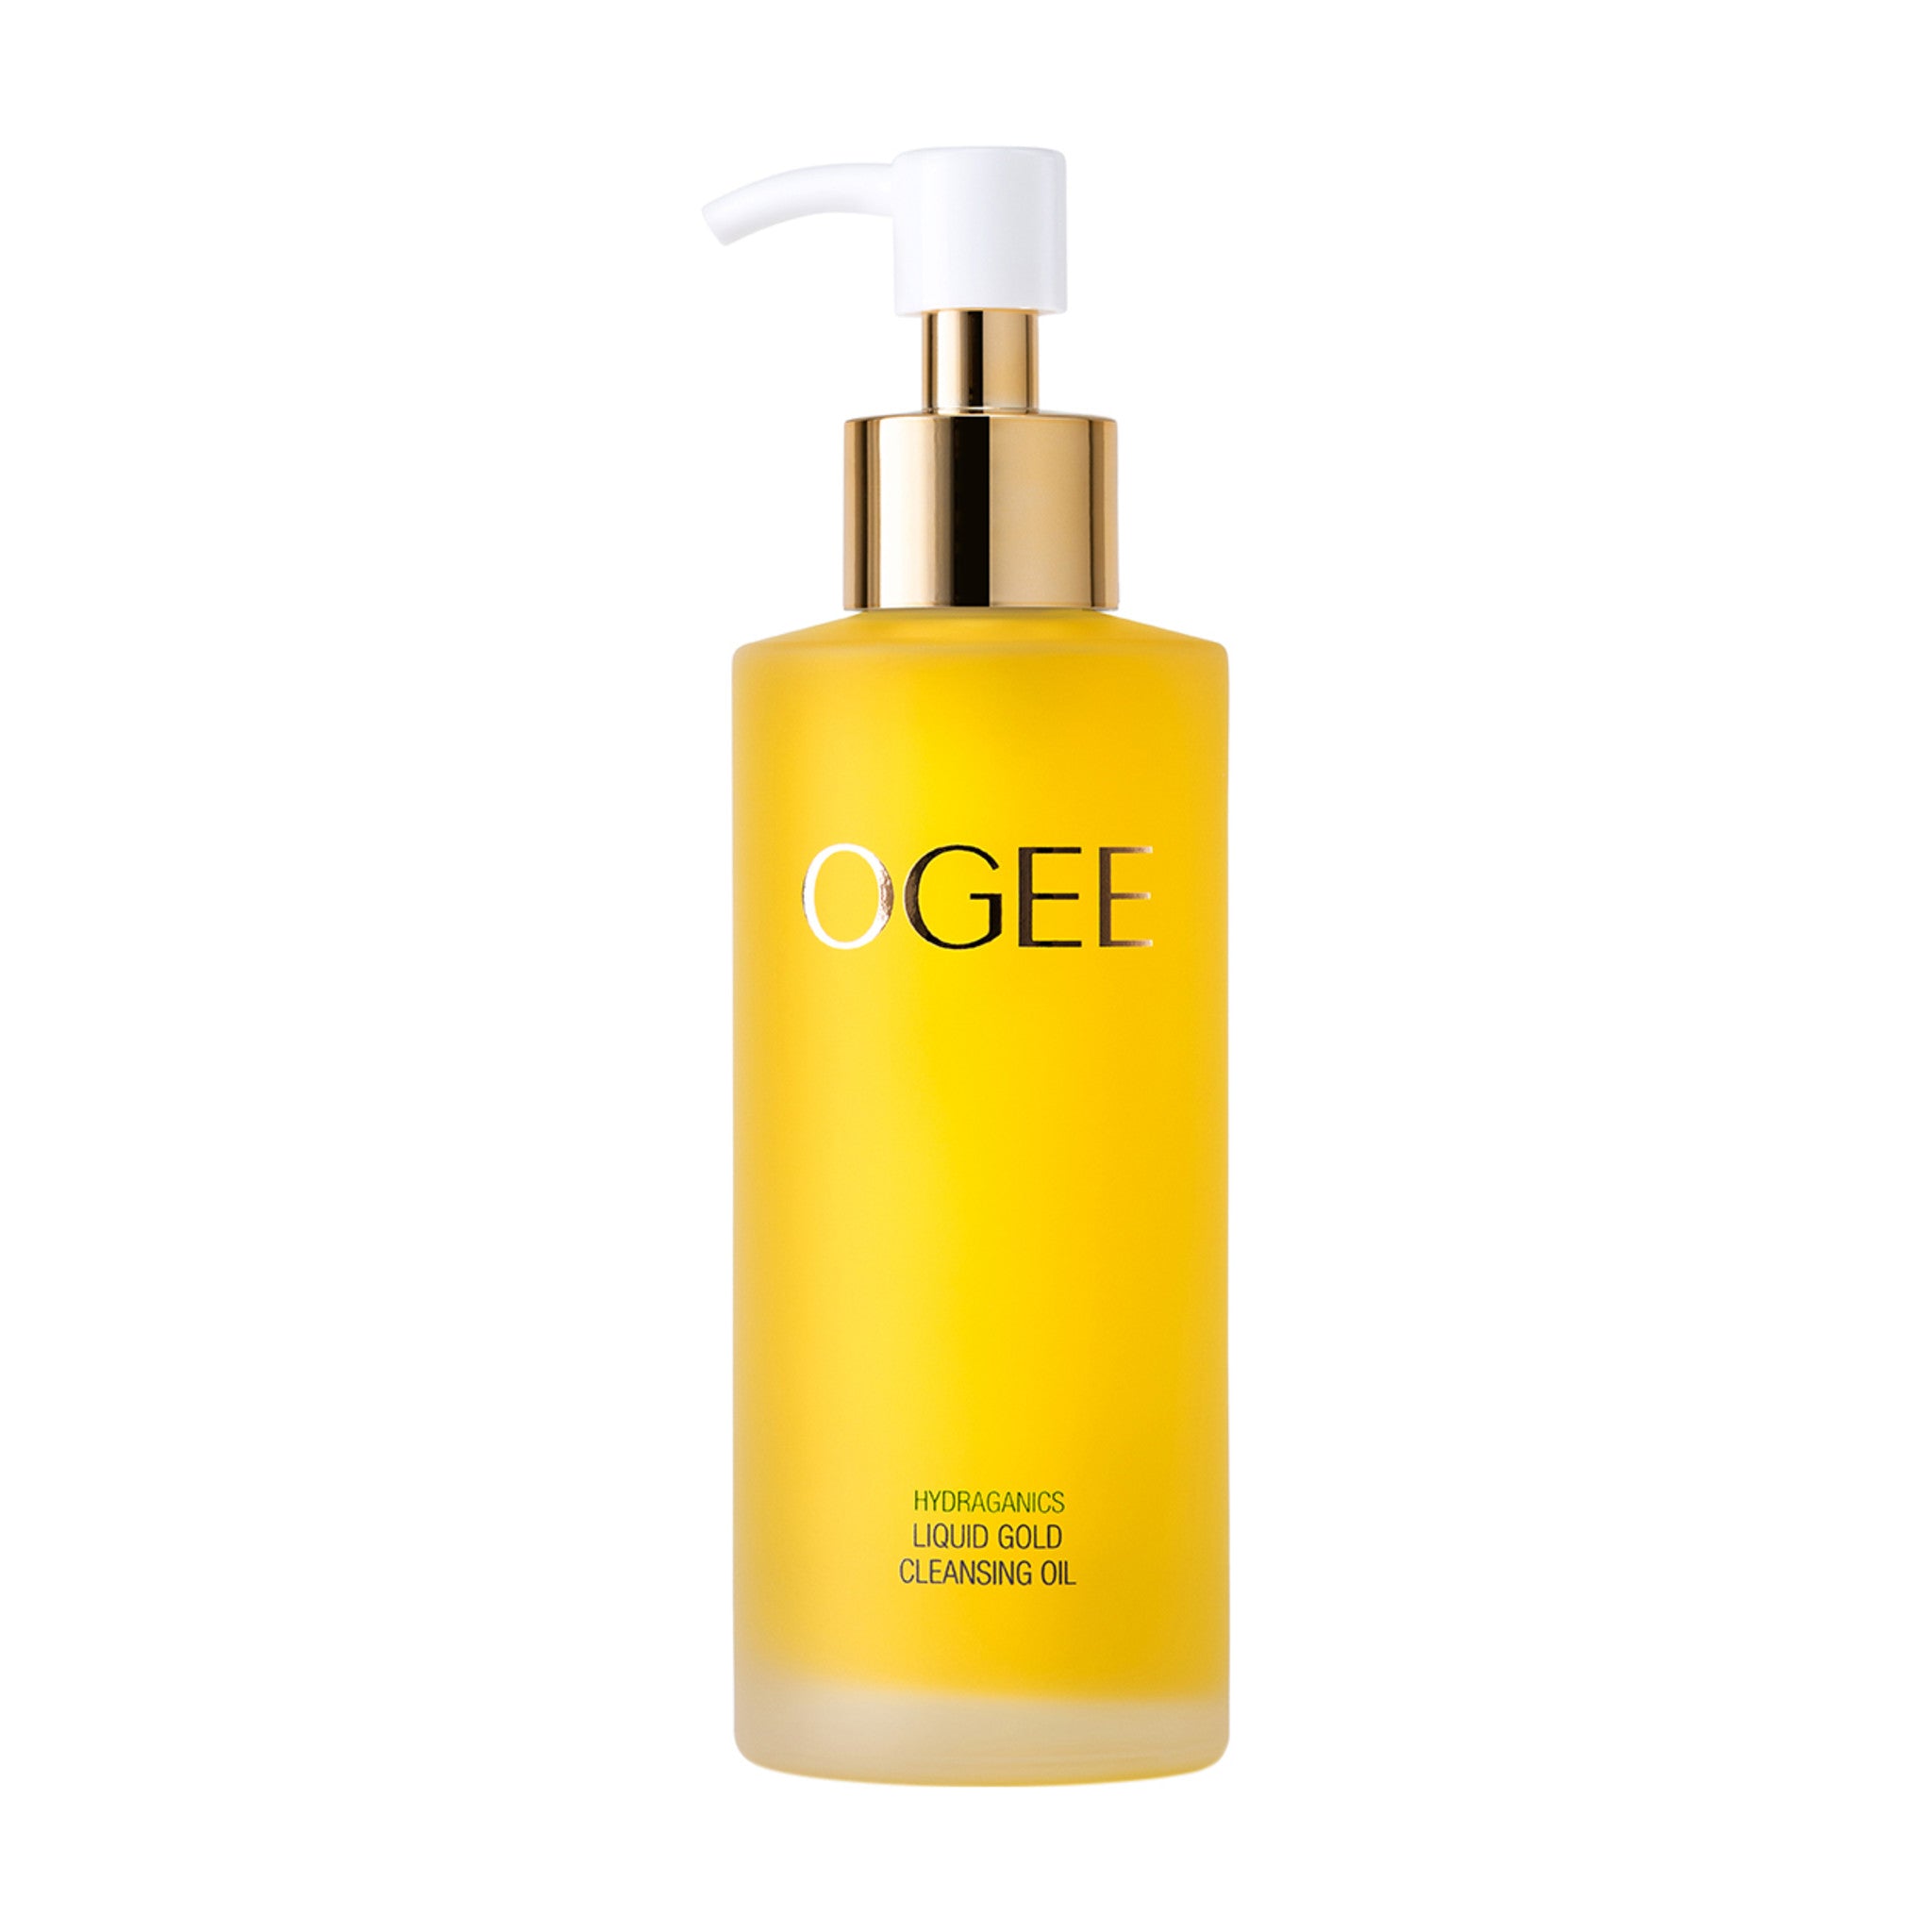 Ogee Liquid Gold Cleansing Oil main image.